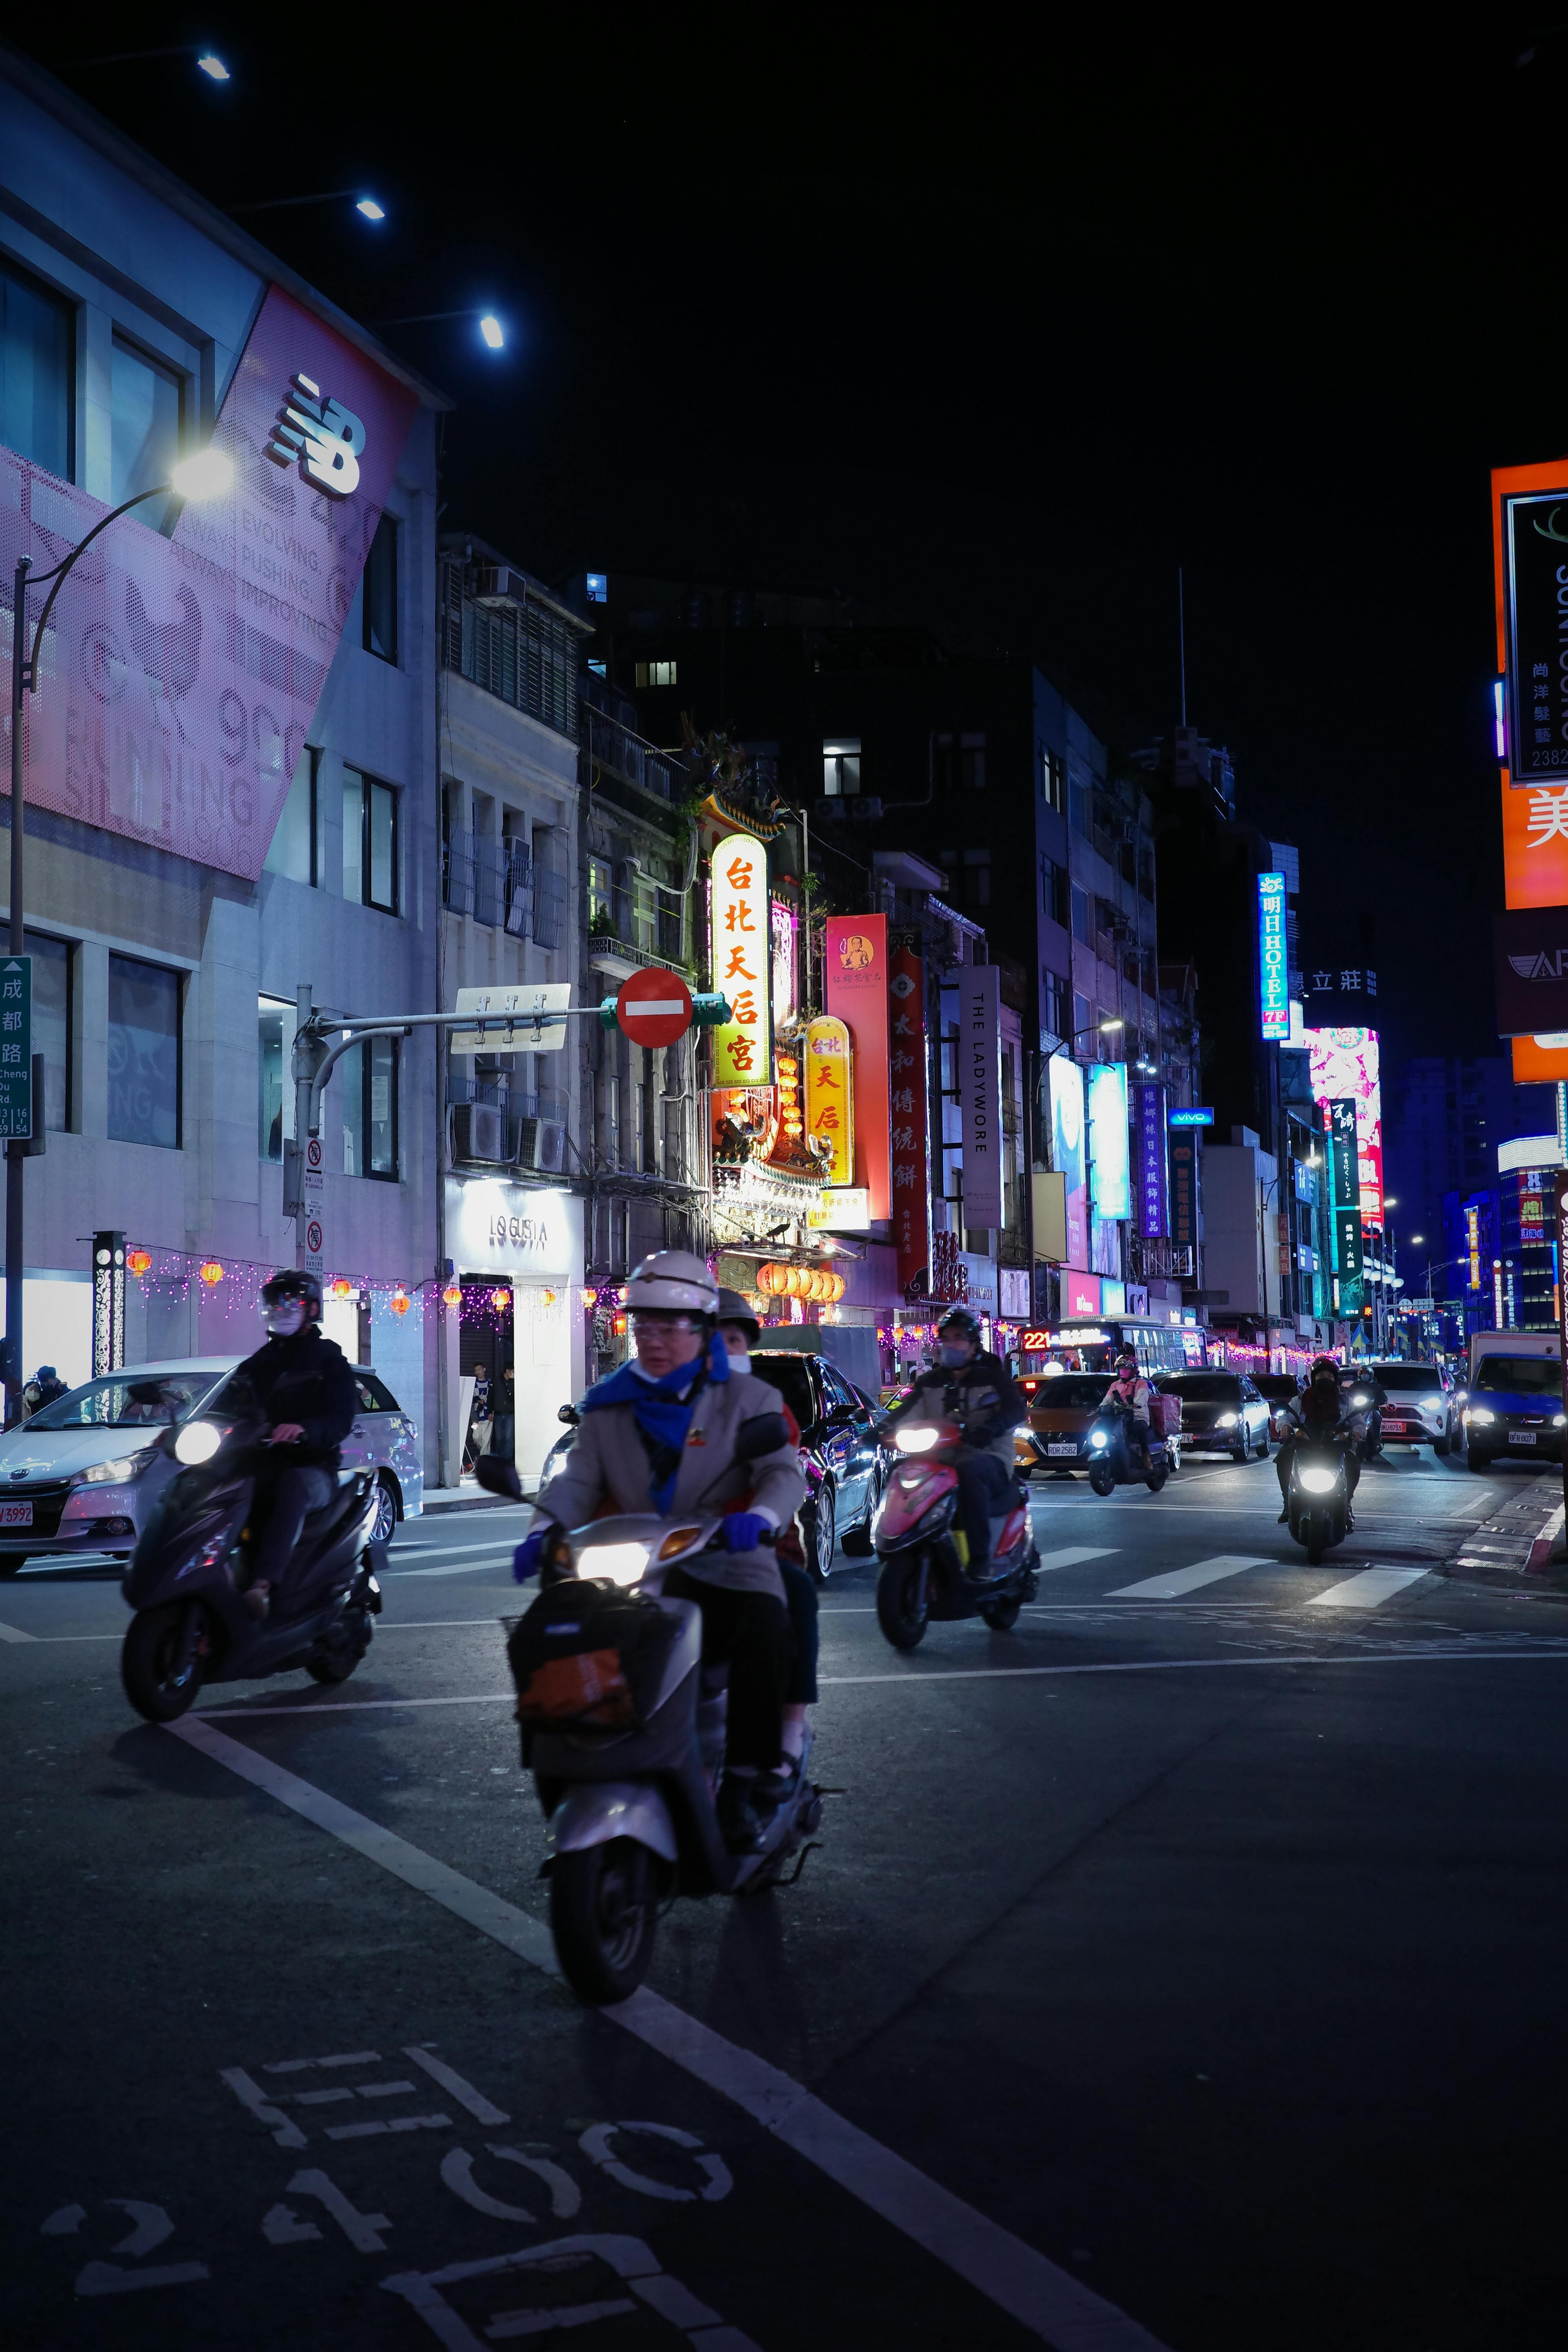 Night shot of pedestrians crossing road full of mopeds in busy